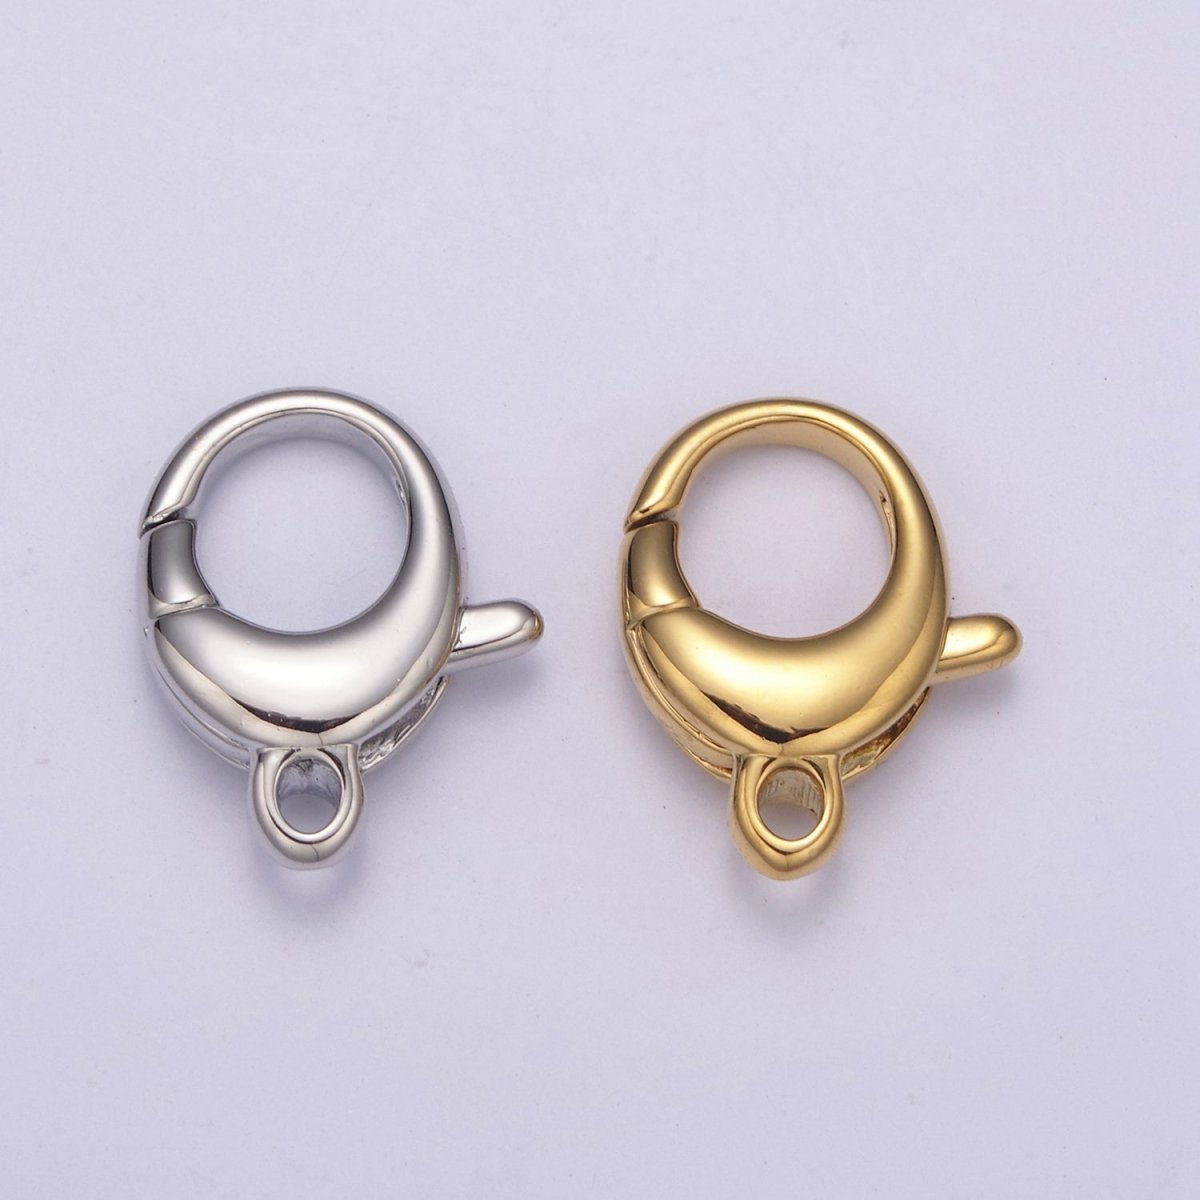 Gold / Silver Lobster Clasps - Oval Style in 24k Gold Filled L-594 L-595 - DLUXCA